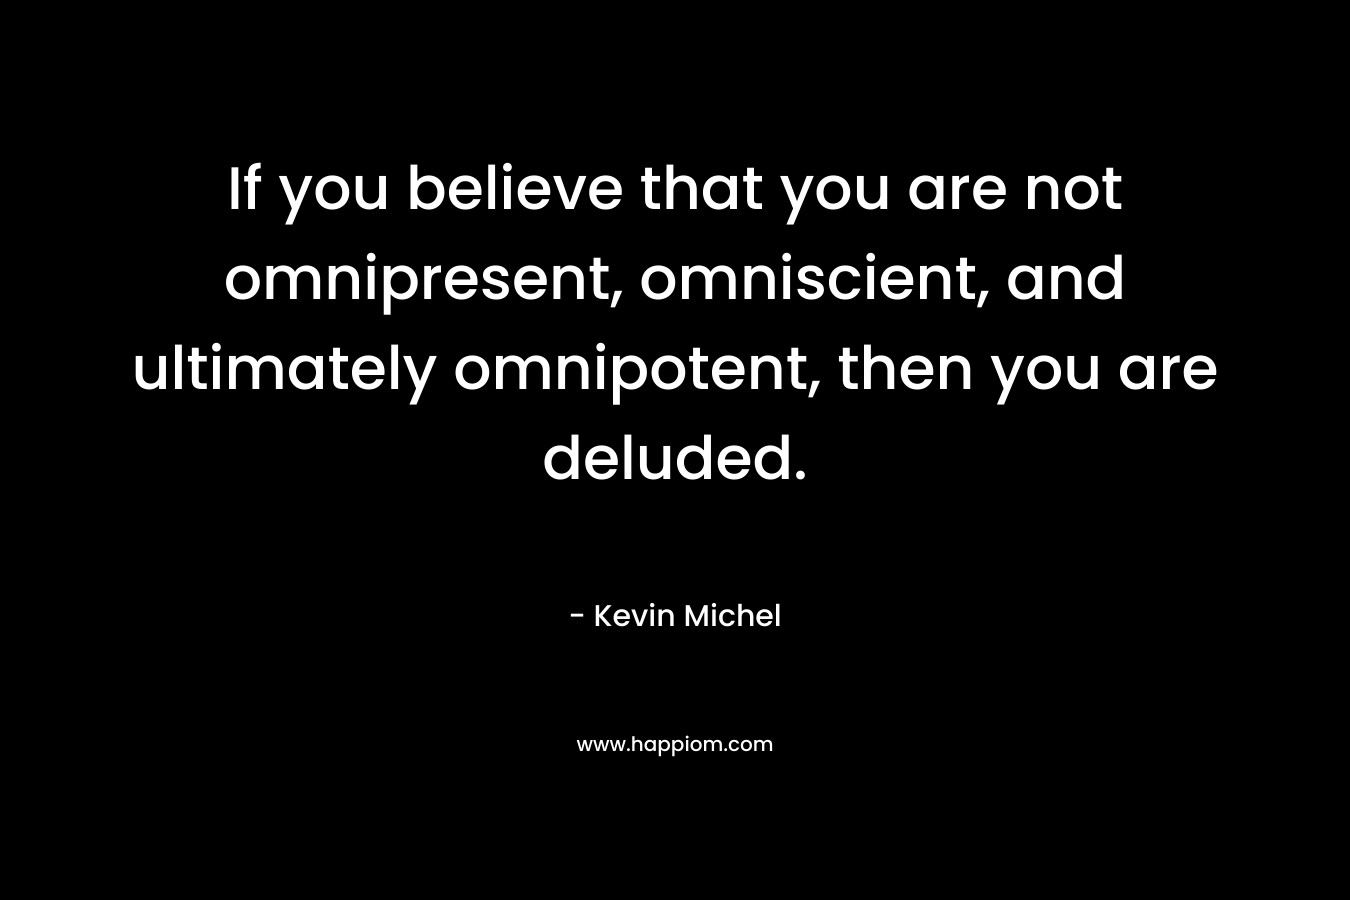 If you believe that you are not omnipresent, omniscient, and ultimately omnipotent, then you are deluded. – Kevin Michel